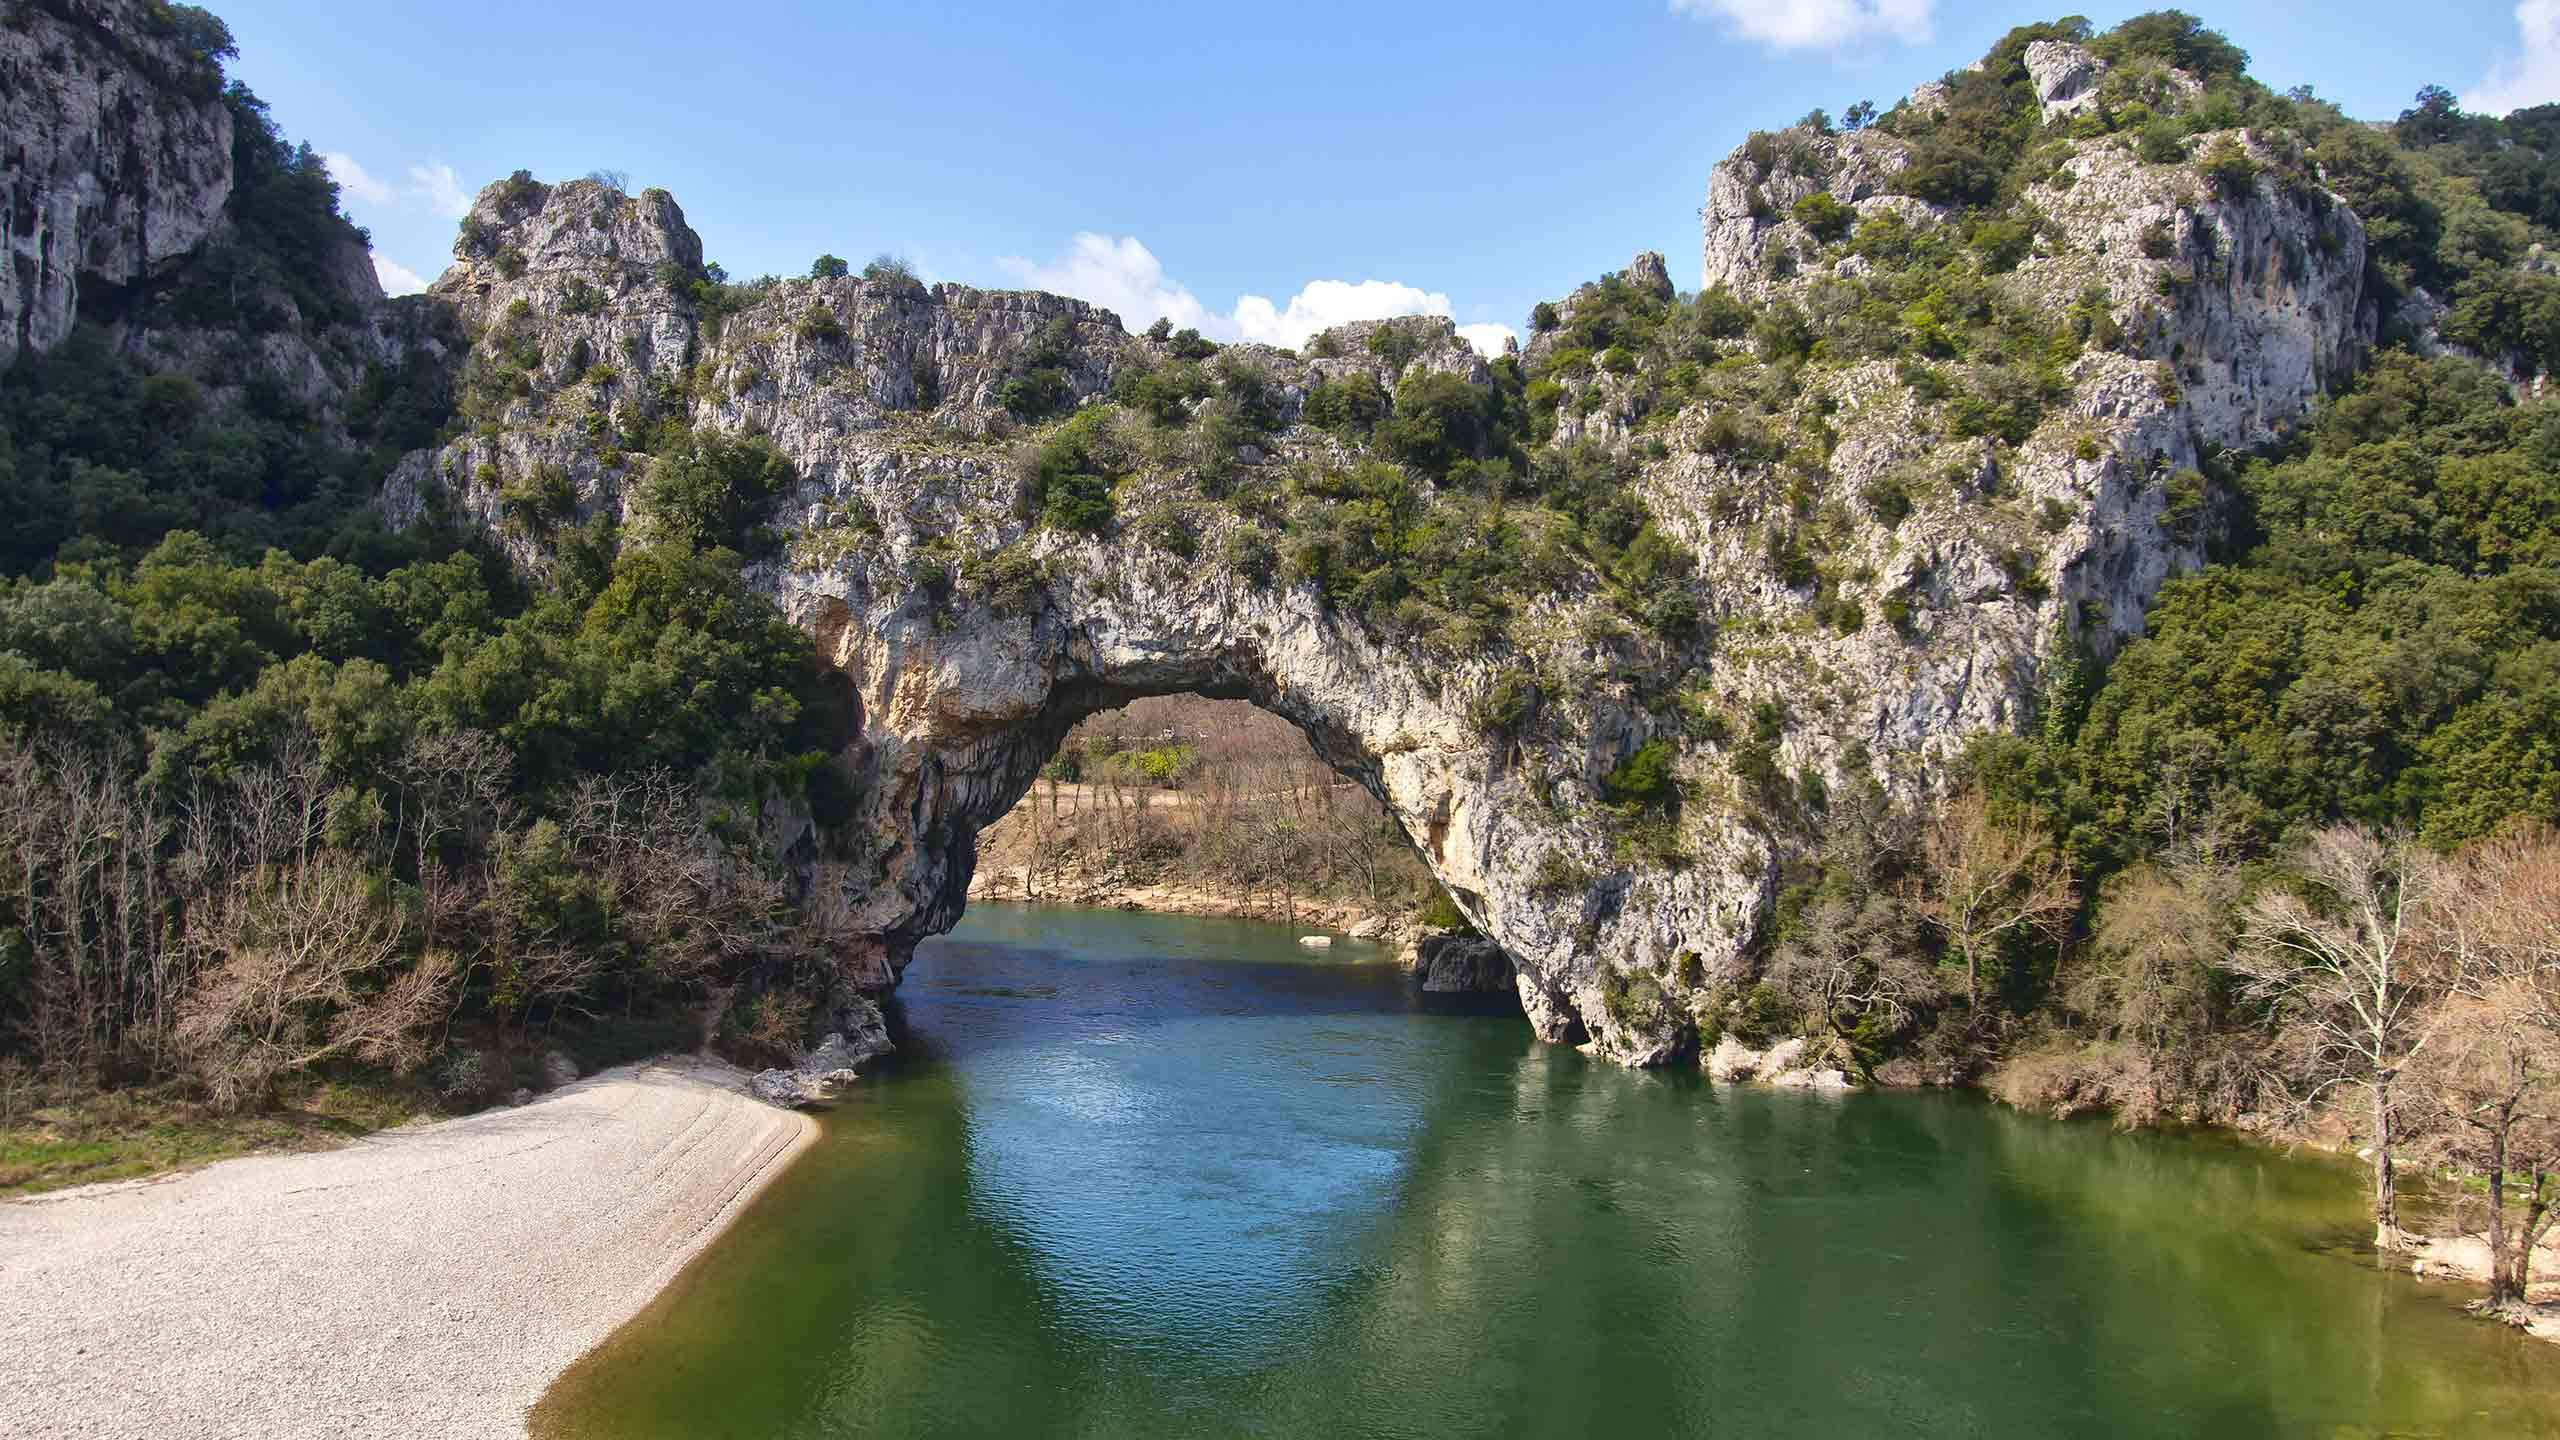 Active & Discovery On The Rhone River (Arles To Lyon) 8D7N